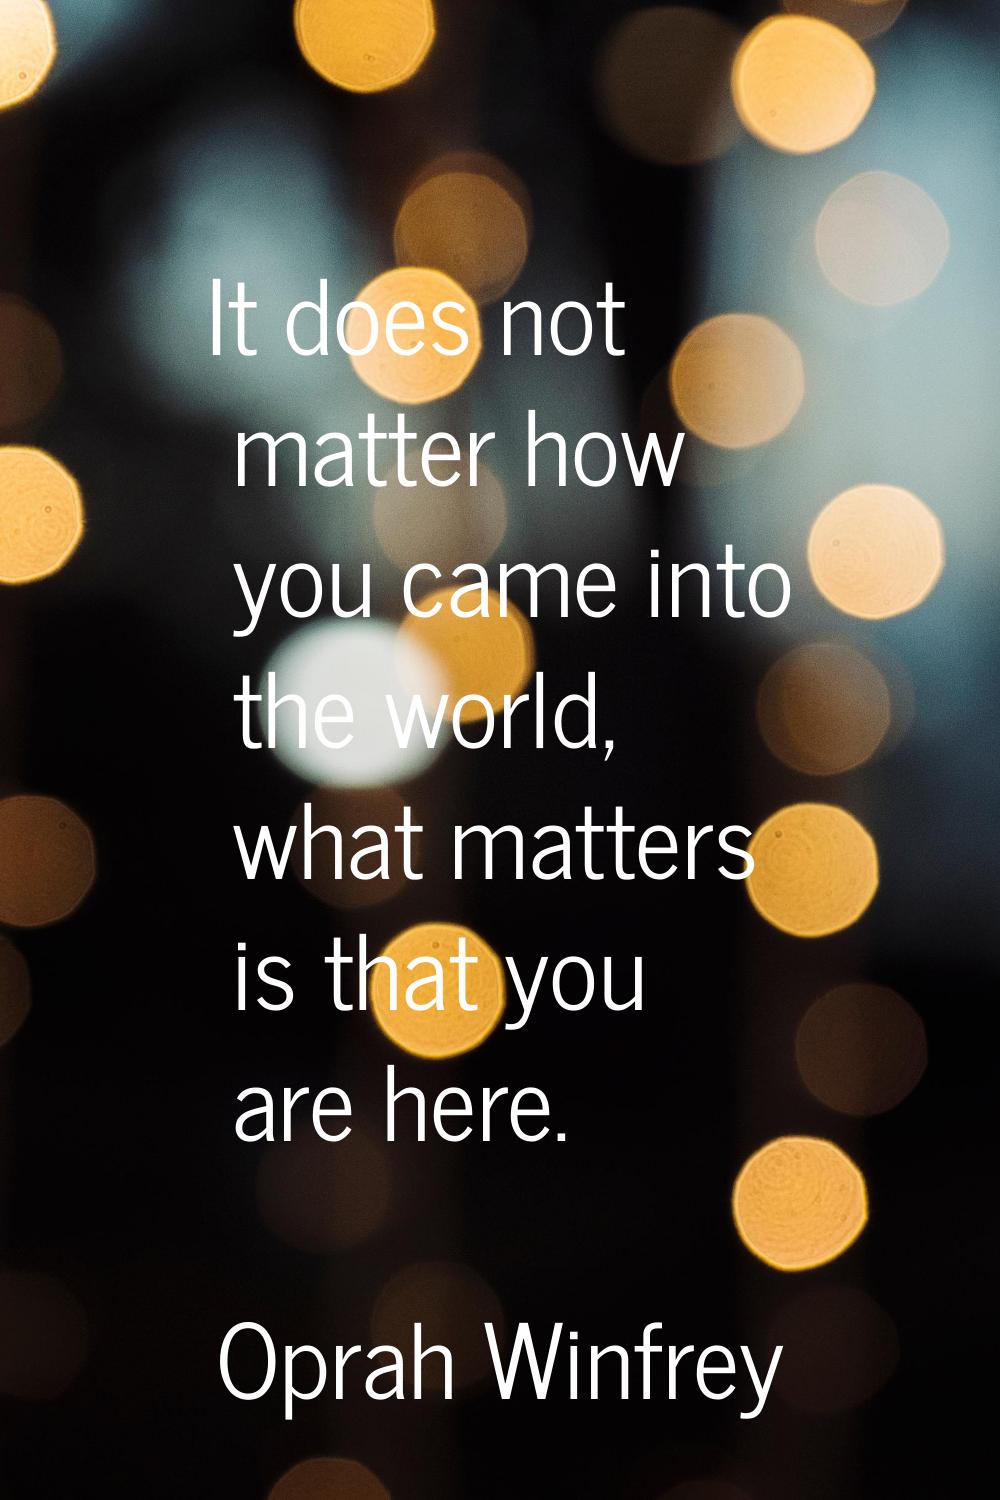 It does not matter how you came into the world, what matters is that you are here.